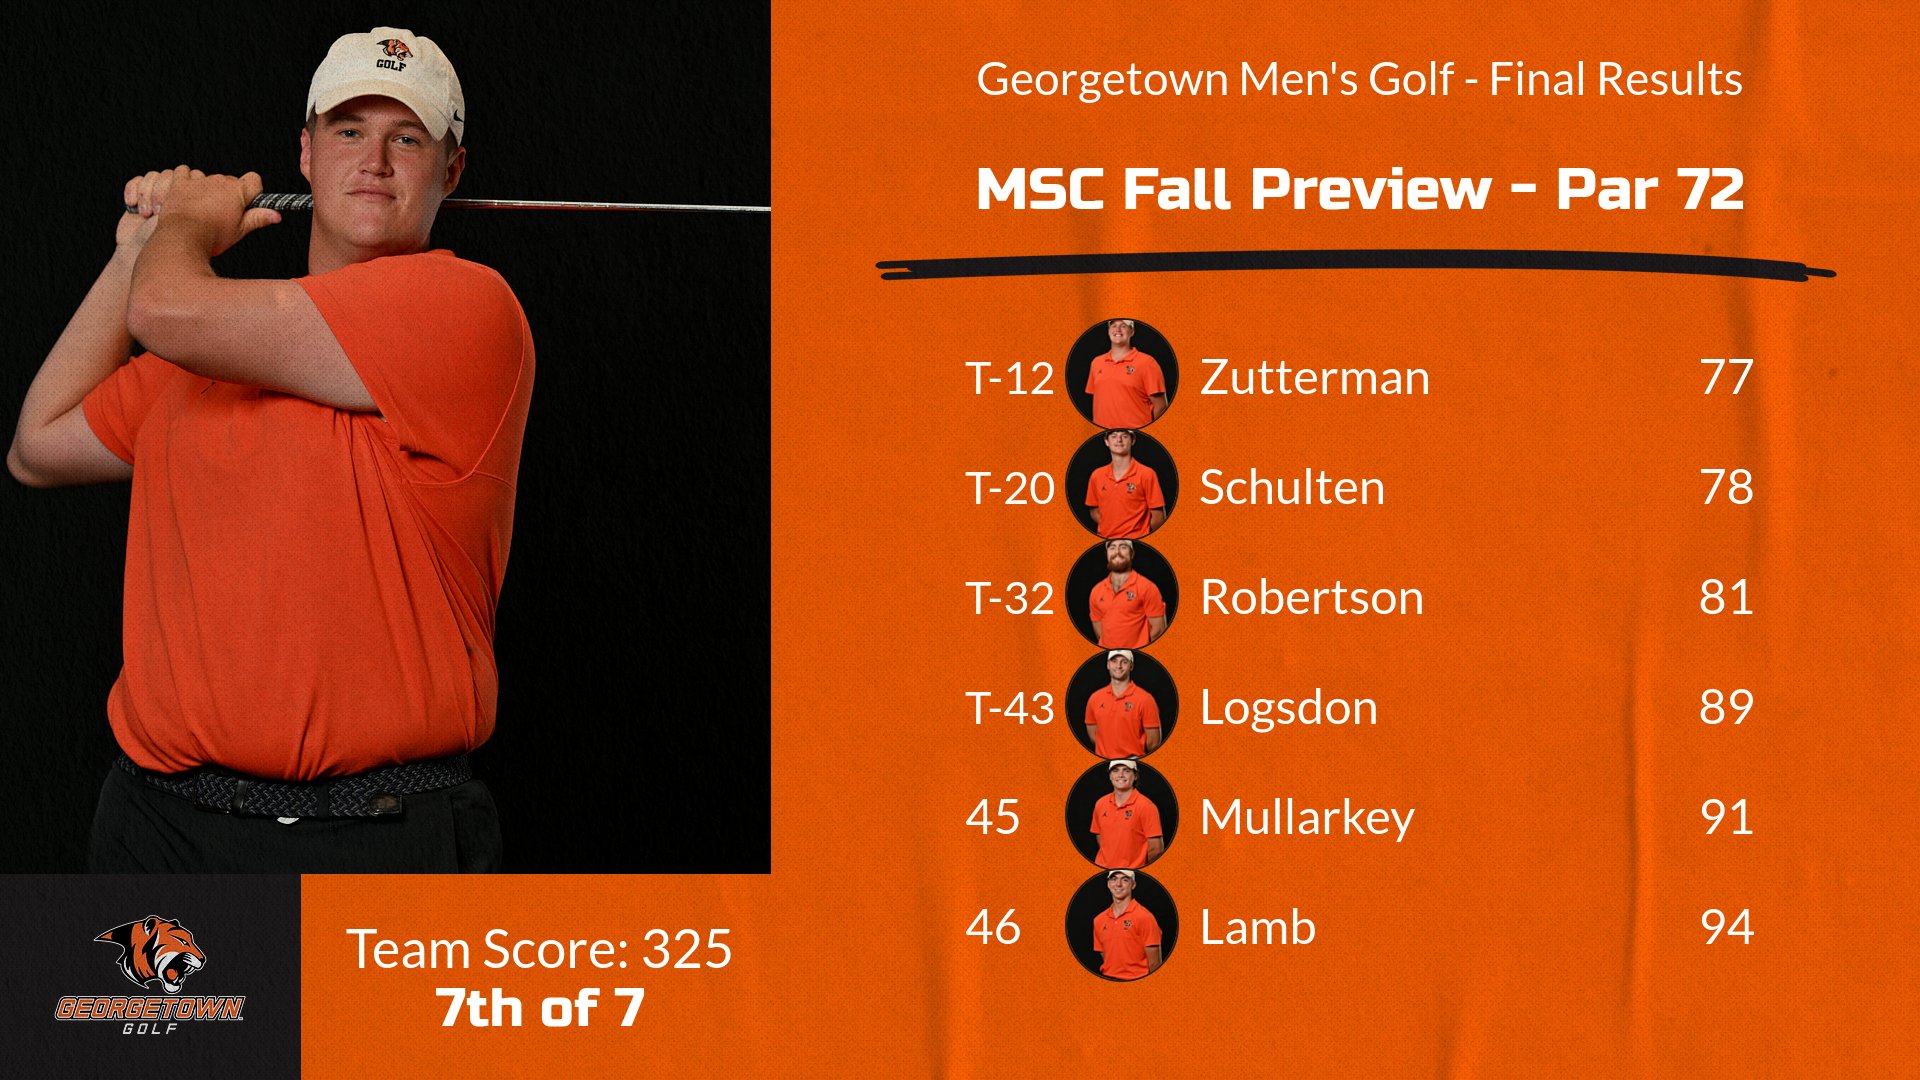 Zutterman leads Men's Golf at MSC Fall Preview